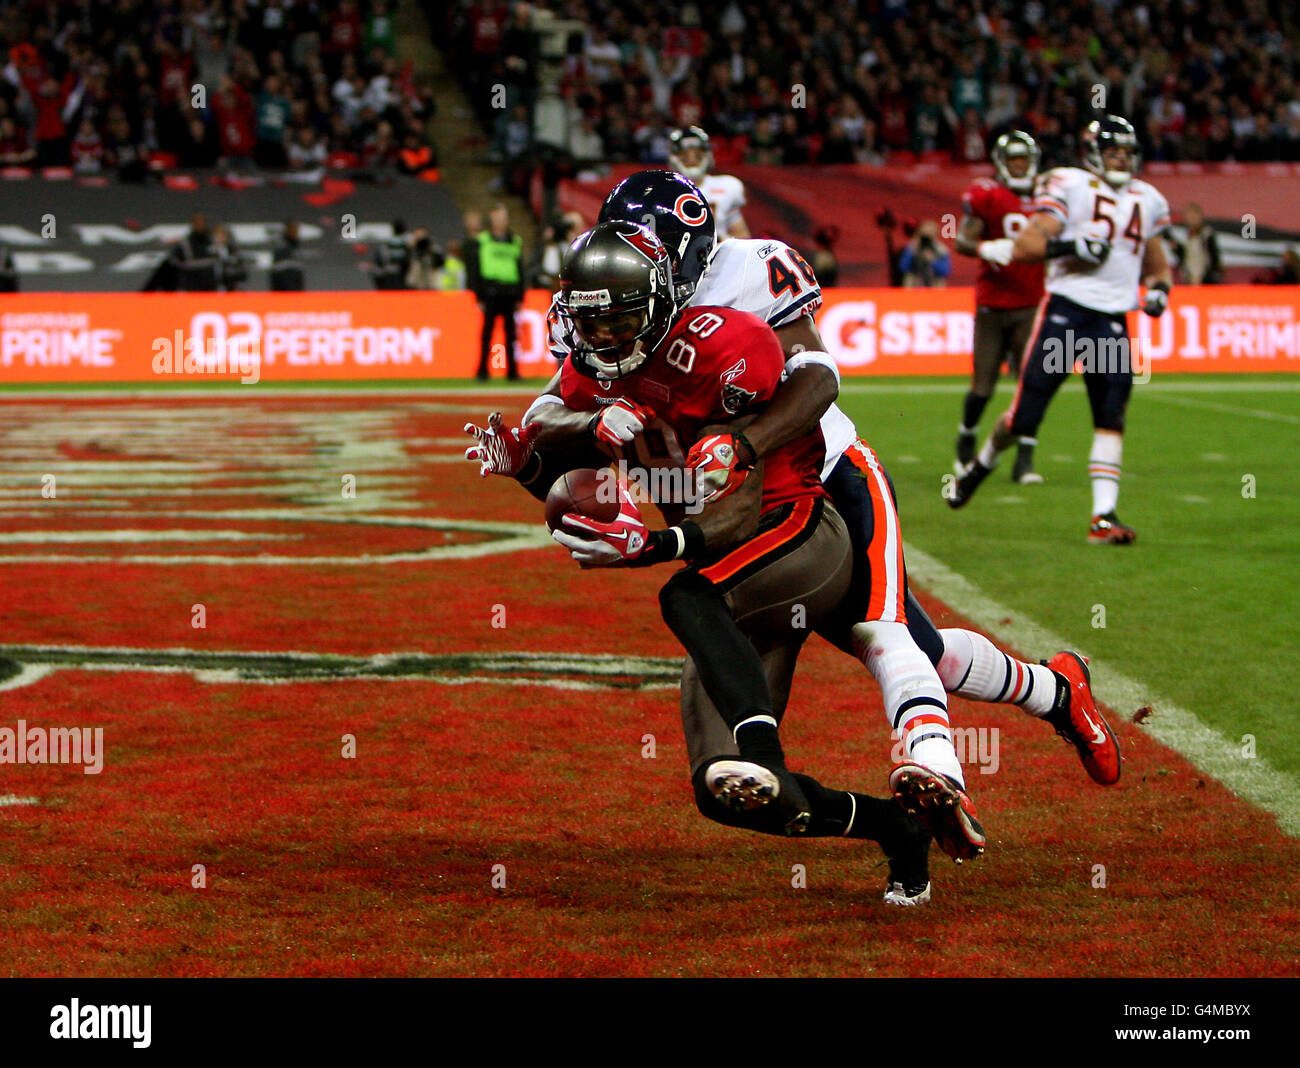 Tampa Bay Buccaneers Dezmon Briscoe runs his sides second touchdown of the  game during the NFL International Series Match at Wembley Stadium, London  Stock Photo - Alamy